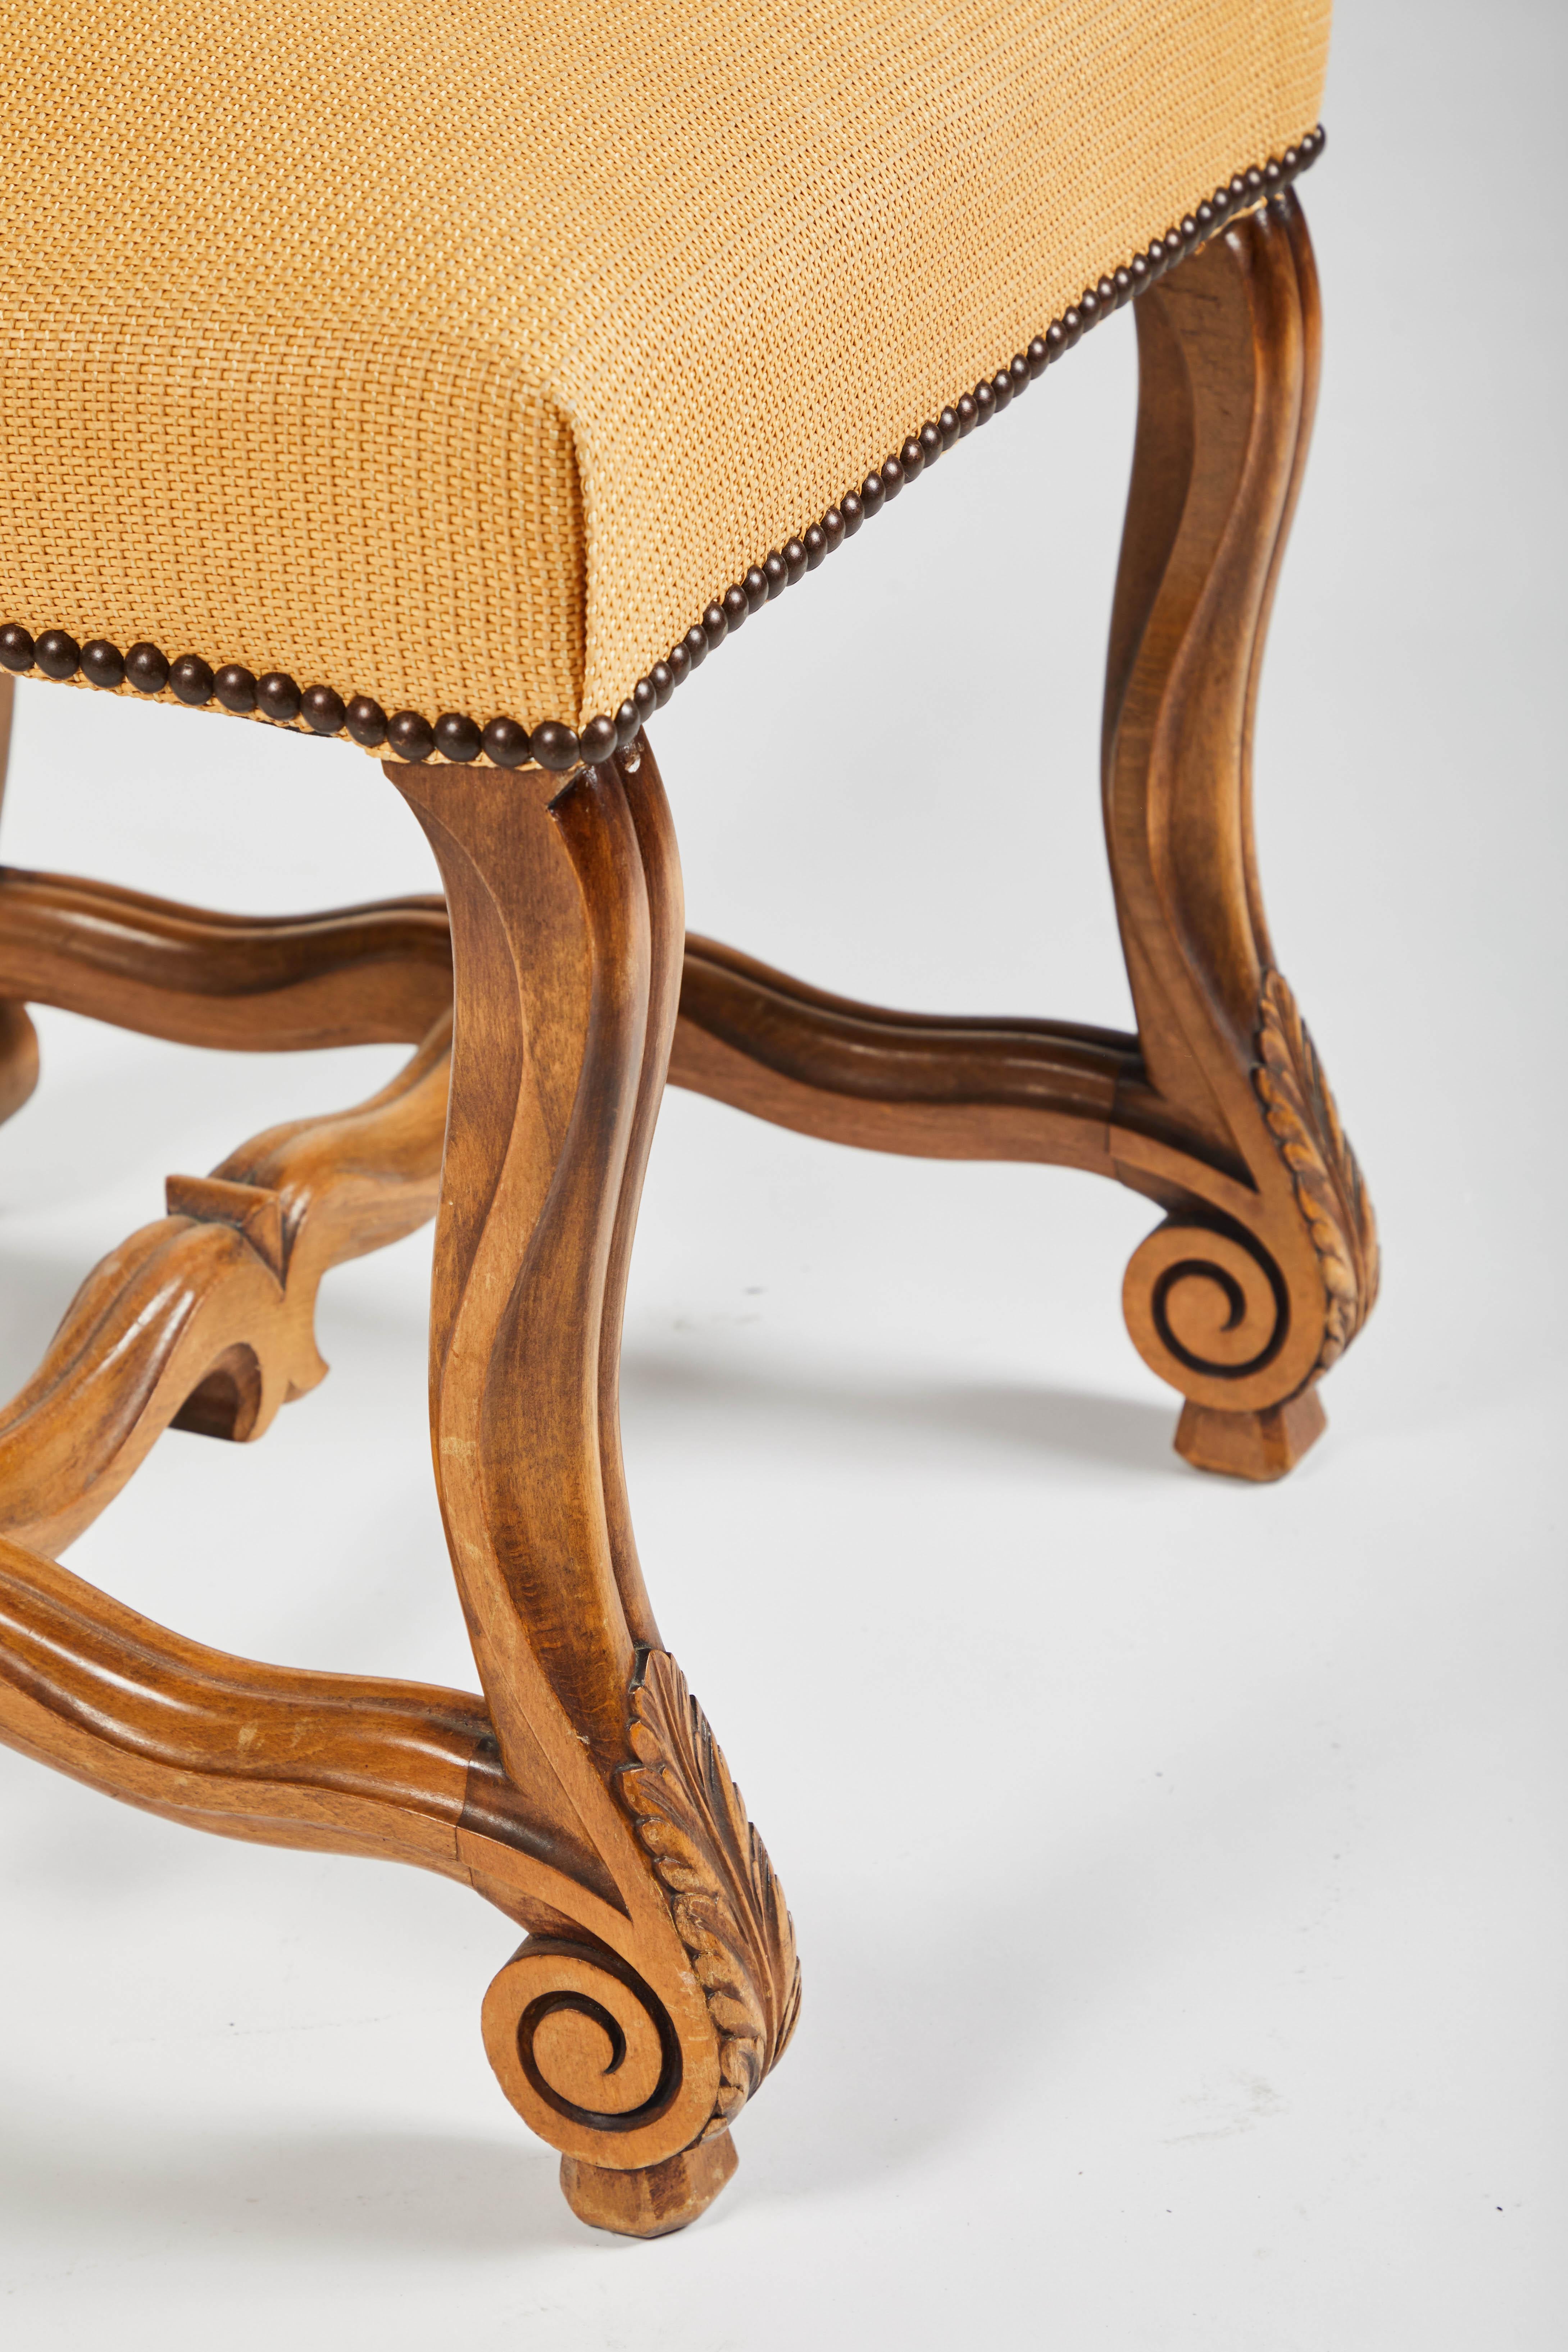 This group of eight side chairs are in the Louis XIV style with H-shaped mutton bone stretchers (Os De Mouton). The wood is a nice warm French oak with nailhead trim. Very strong pegged frame, beautiful patina on wood. 

Perfect around your